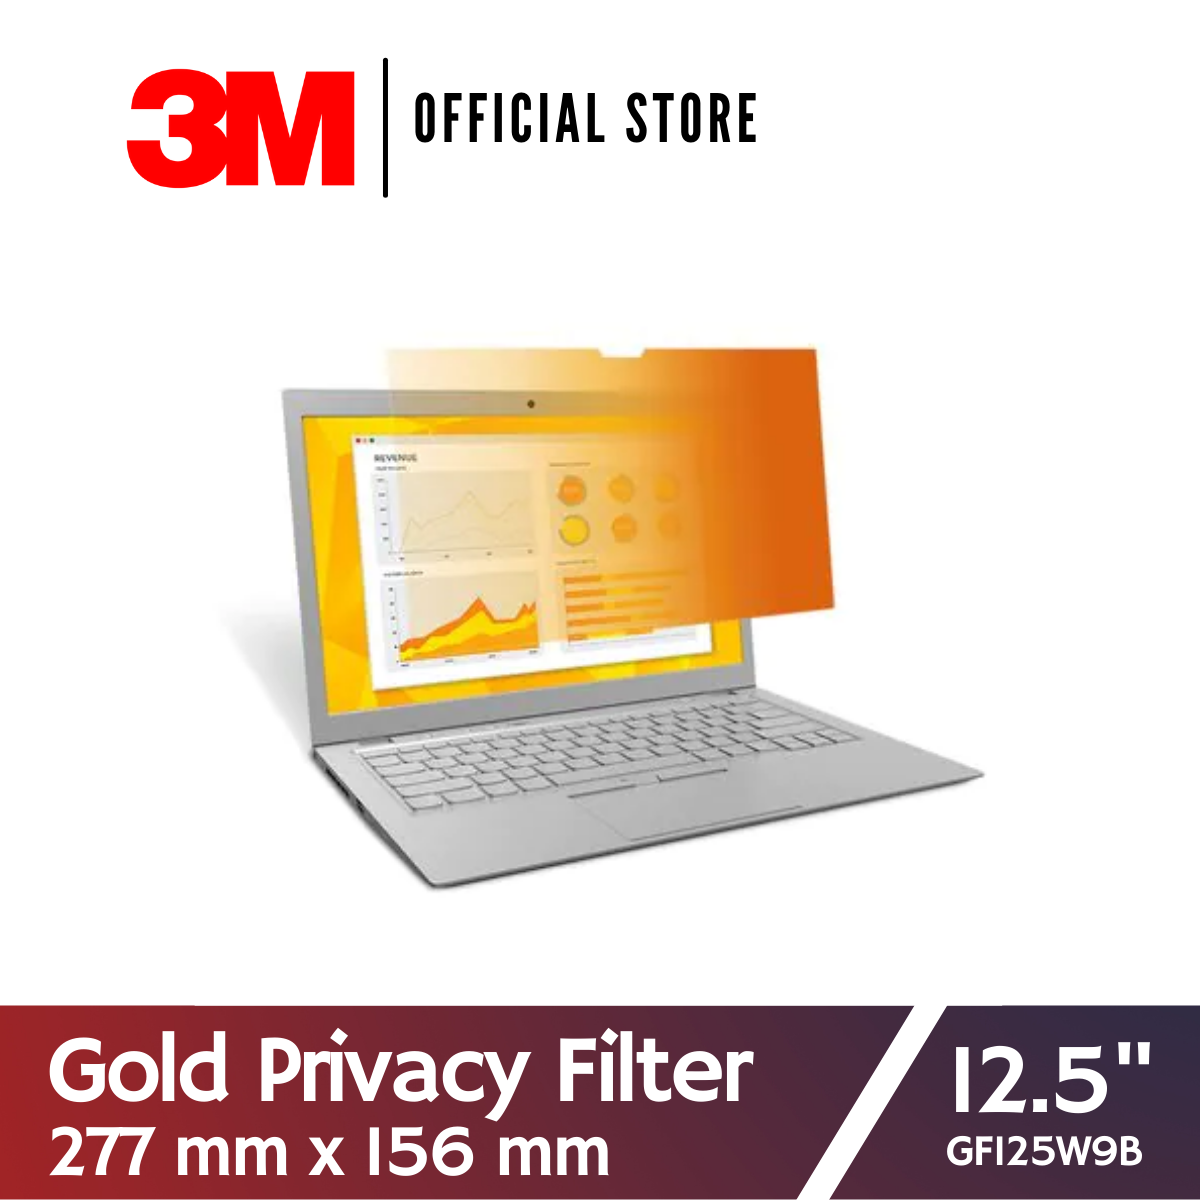 High Clarity Anti Glare Protector Film for Data Confidentiality GF125W9B 16:9 Aspect Ratio Gold Laptop Privacy Screen Filter for 12.5 Inch Widescreen Display Laptops 